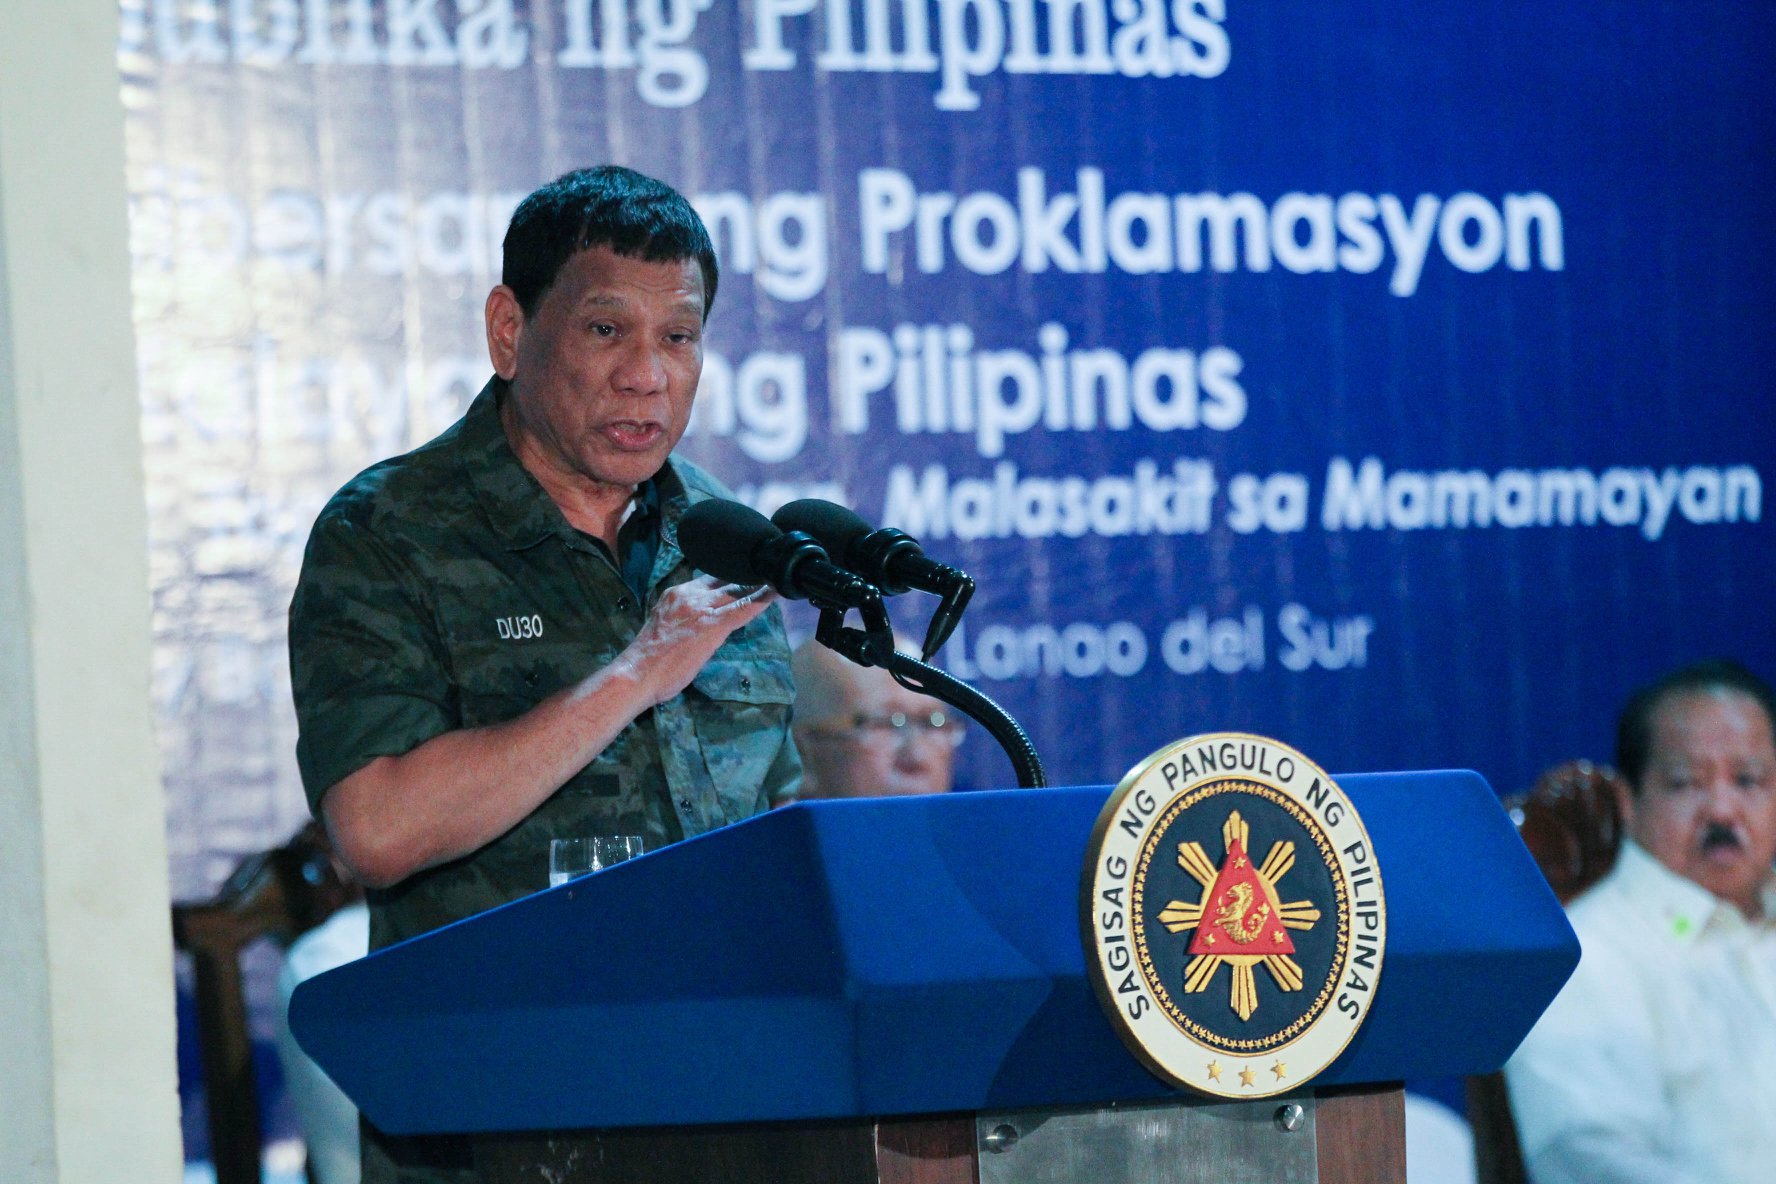 President Rodrigo Duterte at an event in Lanao del Sur on June 12, the day that the Department of Defence divulged the hit and run incident in the West Philippine Sea. Photo: Presidential Communications Facebook page